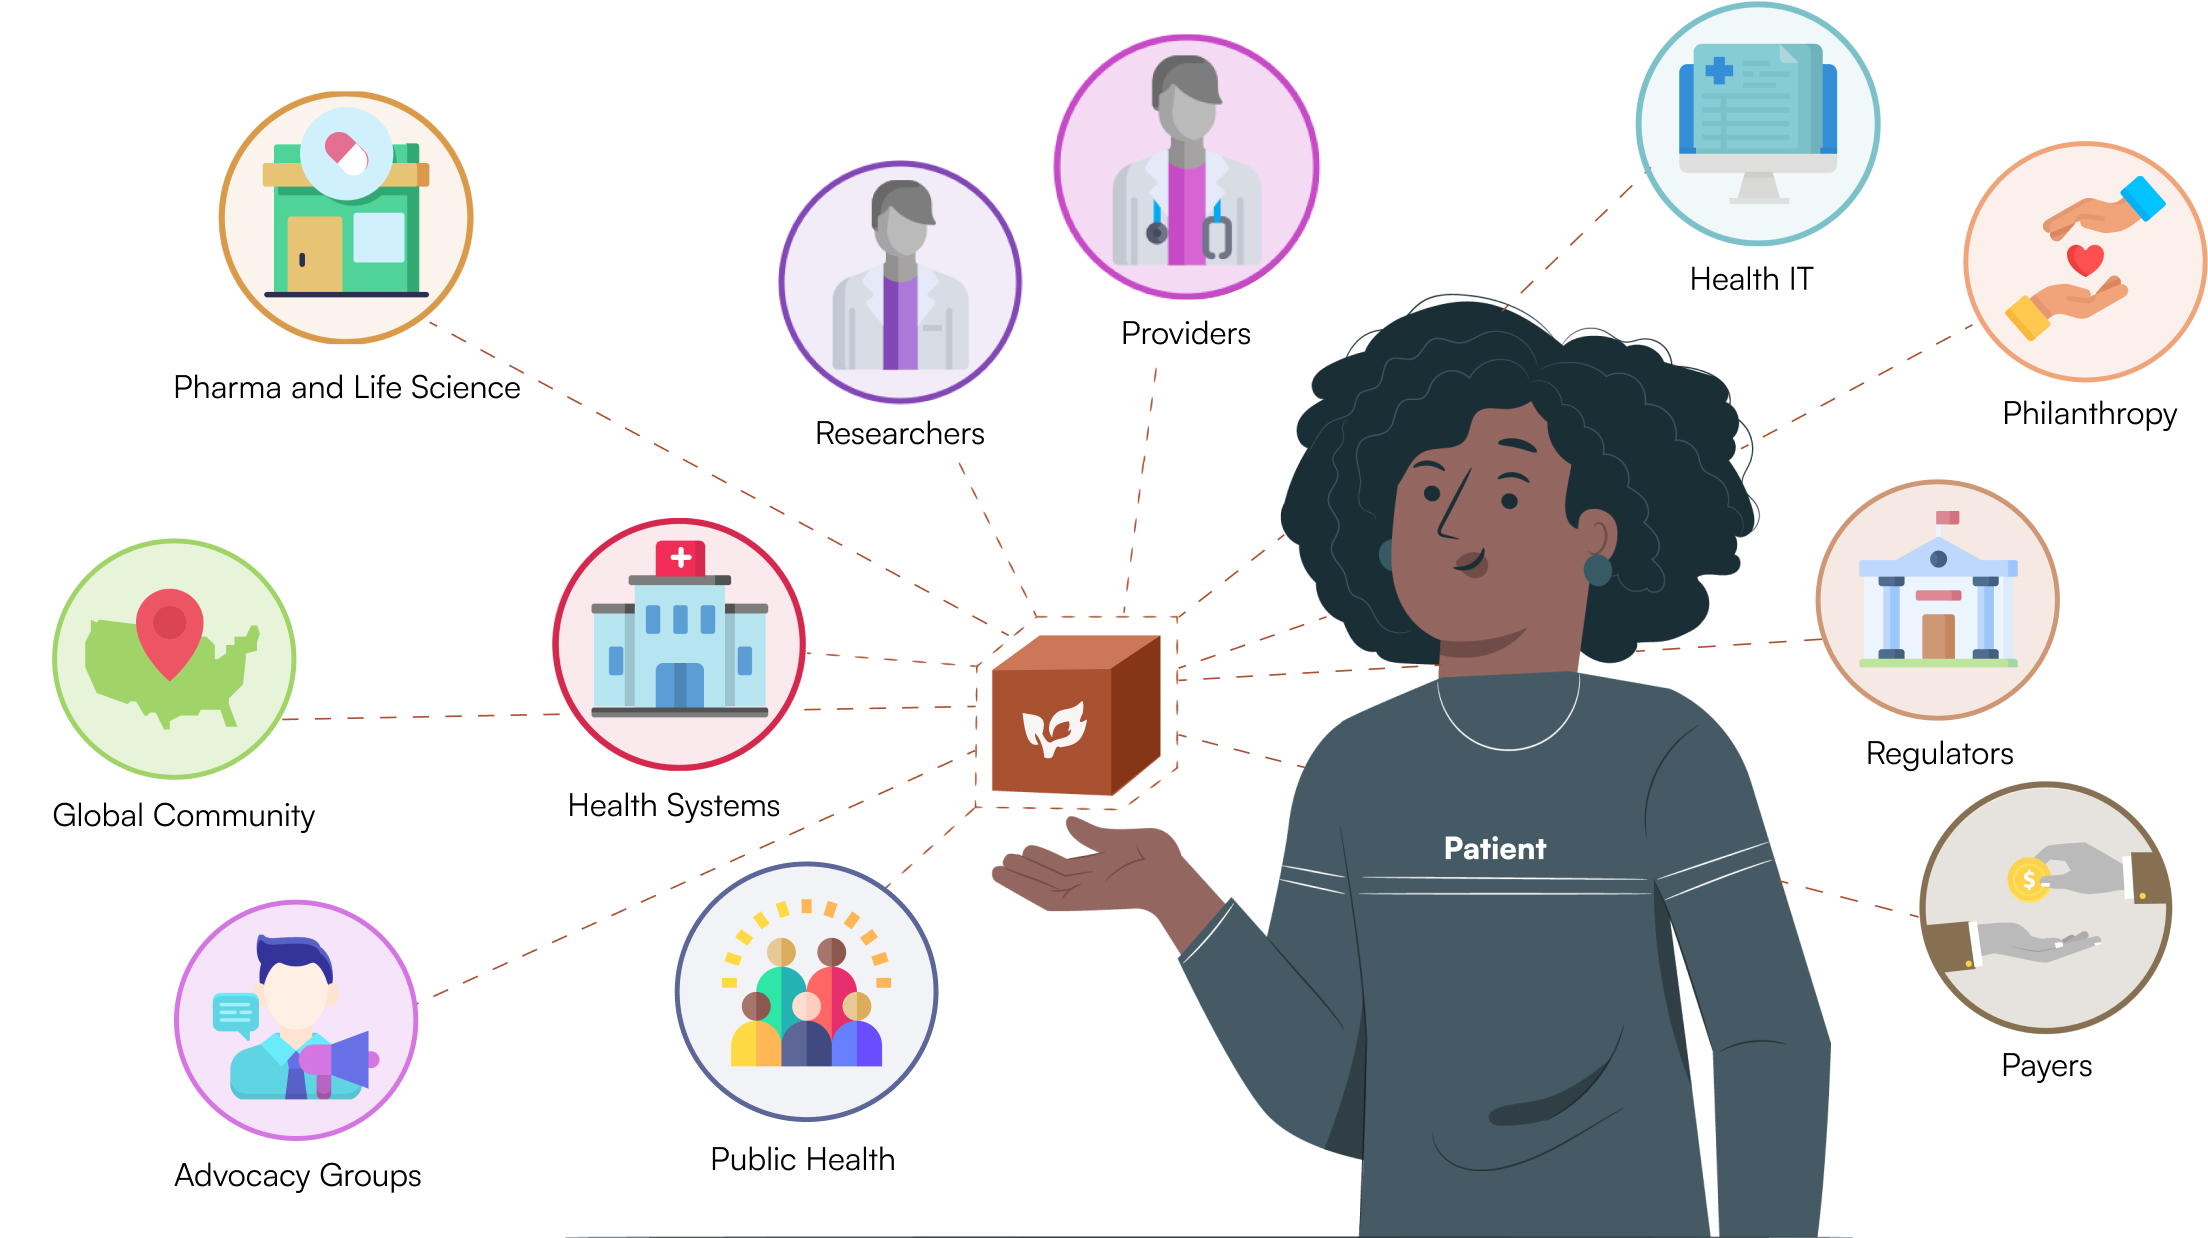 The CodeX Community stakeholder map which includes patients, researchers, providers, payers, pharmaceuticals, health systems, public health, advocacy groups, global community, health IT, regulators, and philanthropy.